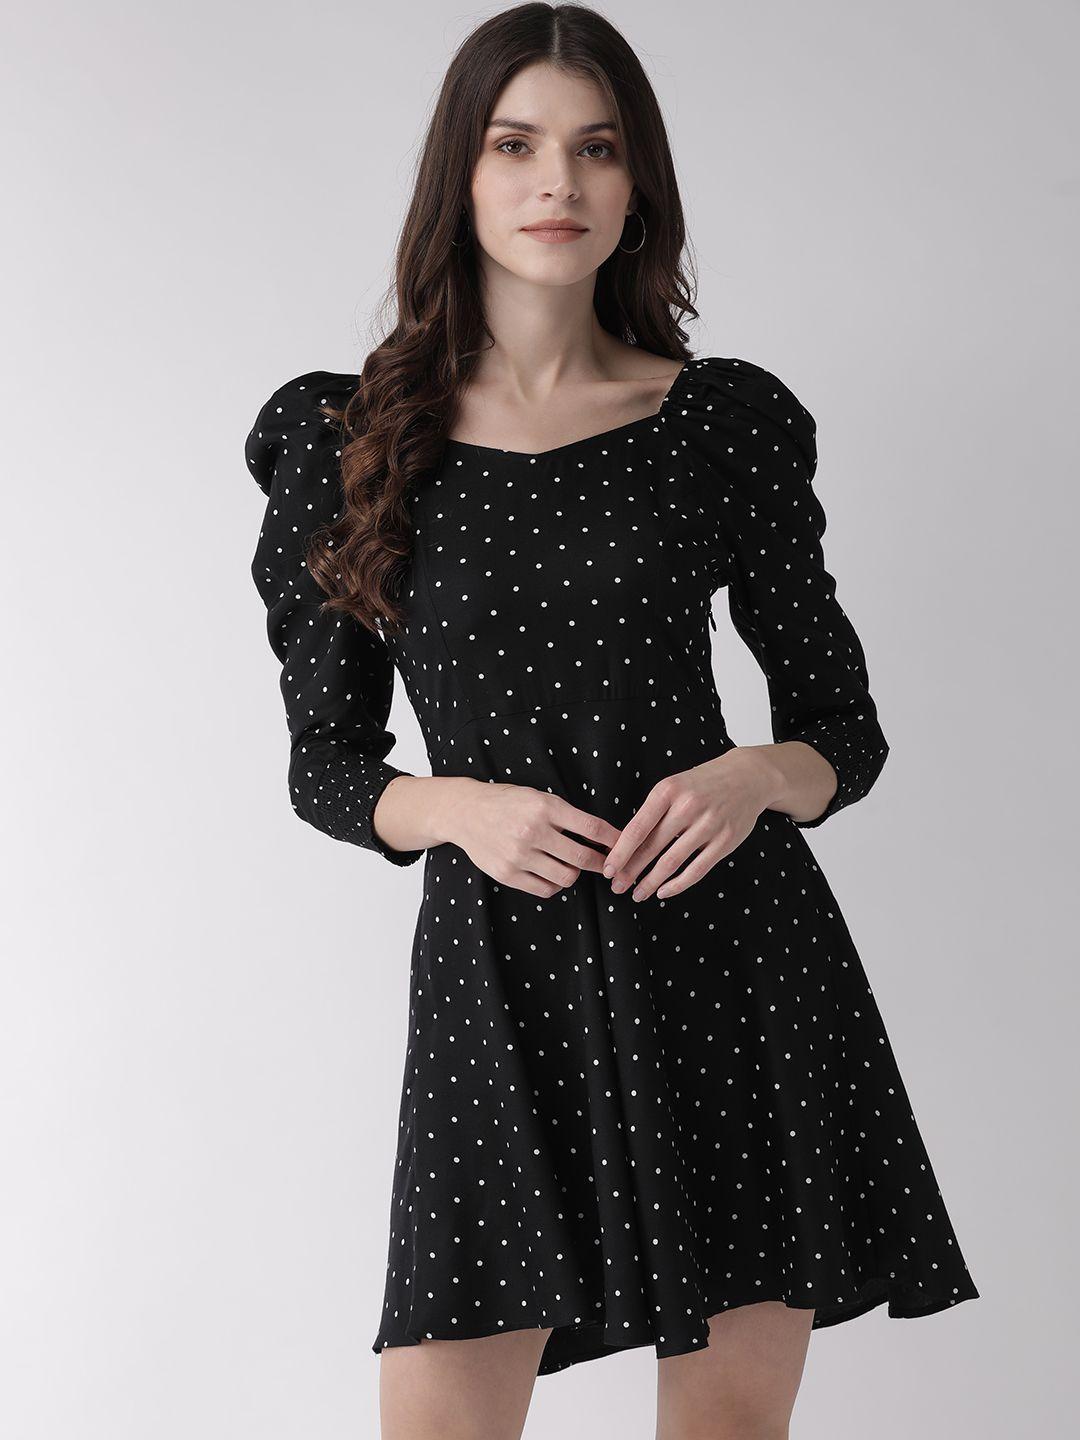 20dresses black & white polka dots printed fit and flare dress